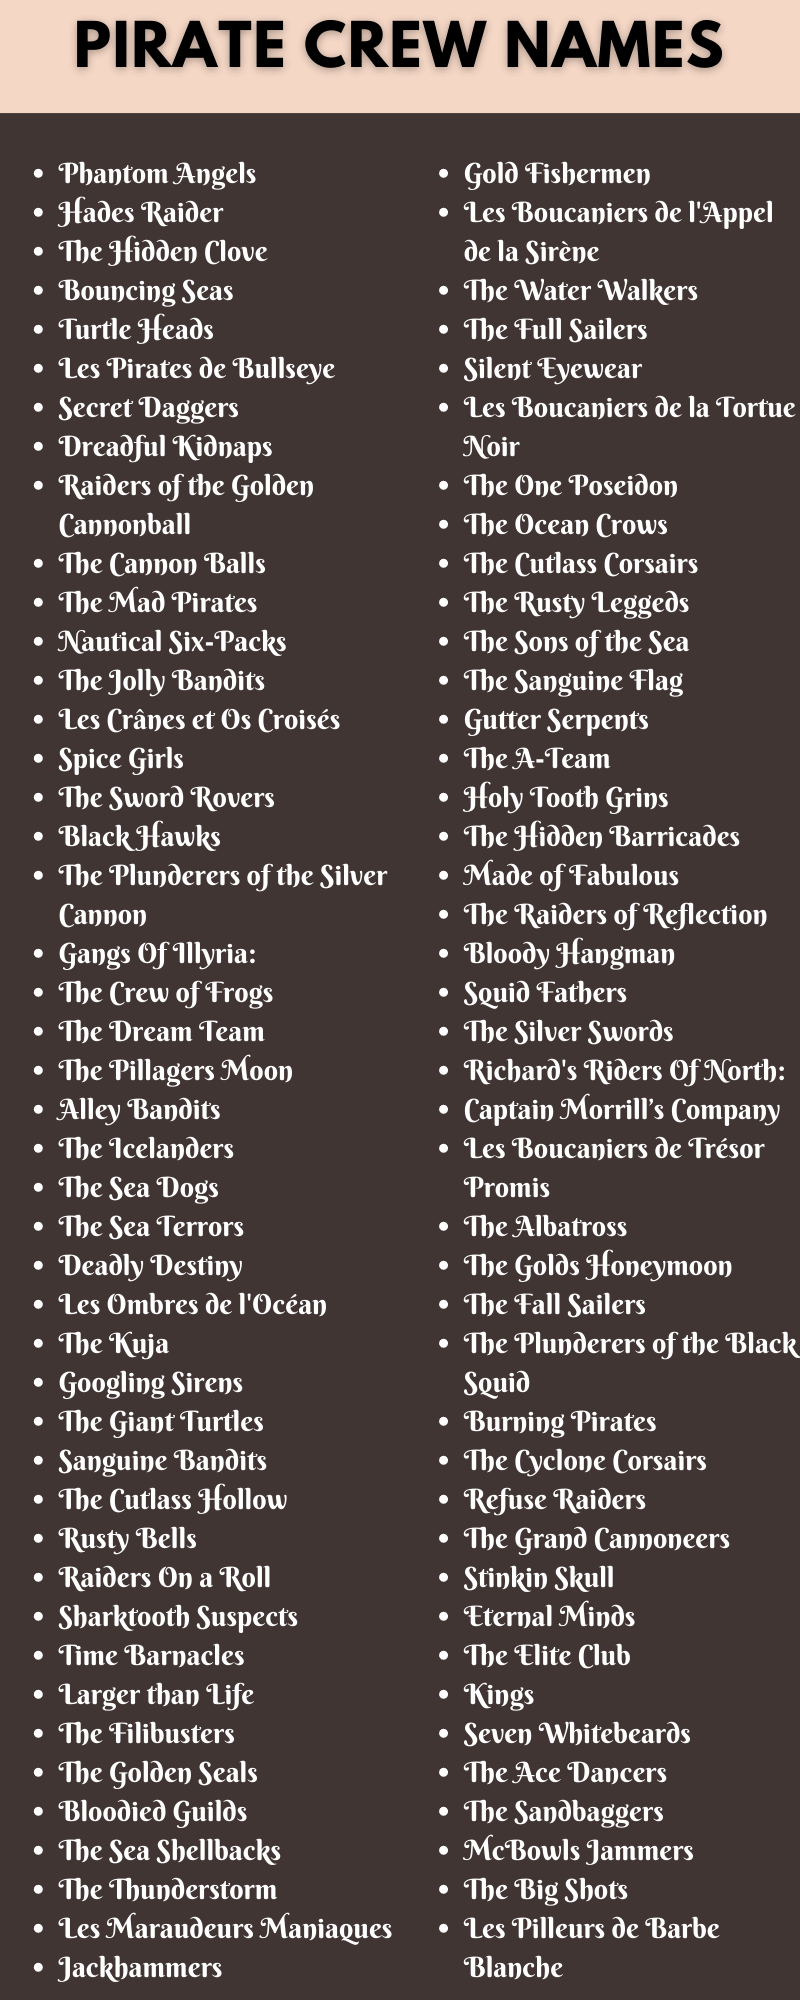 450 Catchy Pirate Crew Names Ideas